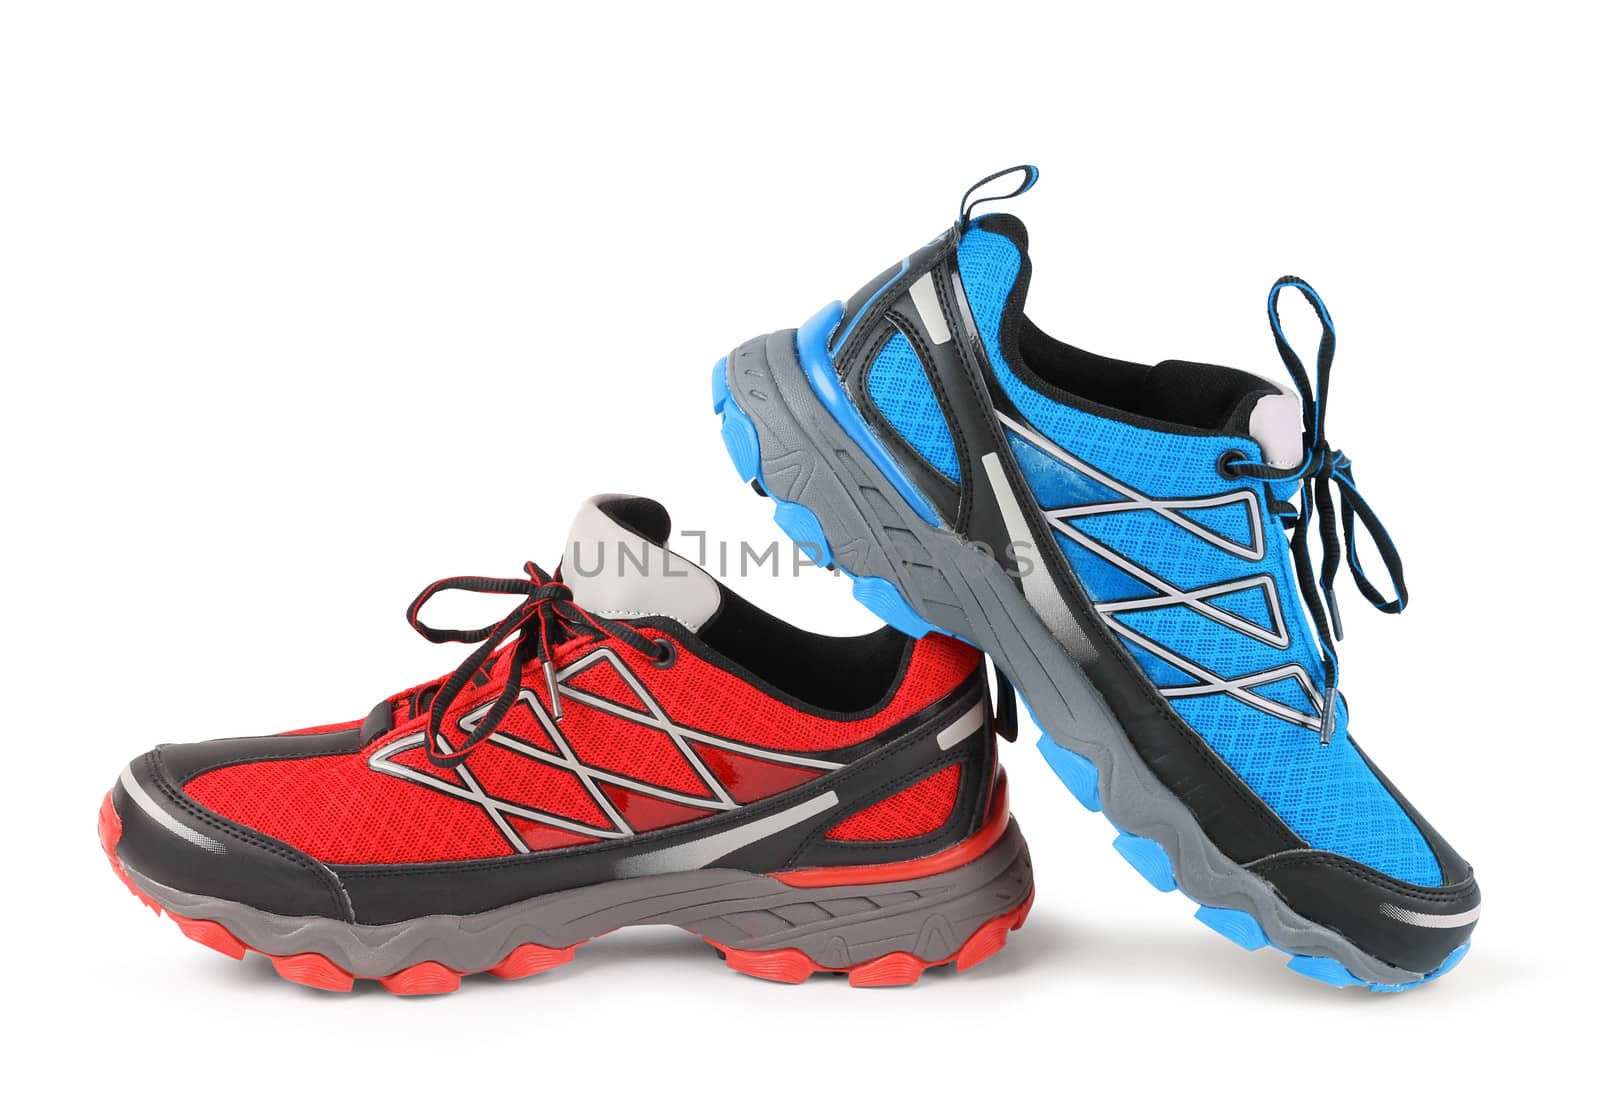 Red and blue running sport shoe by anterovium